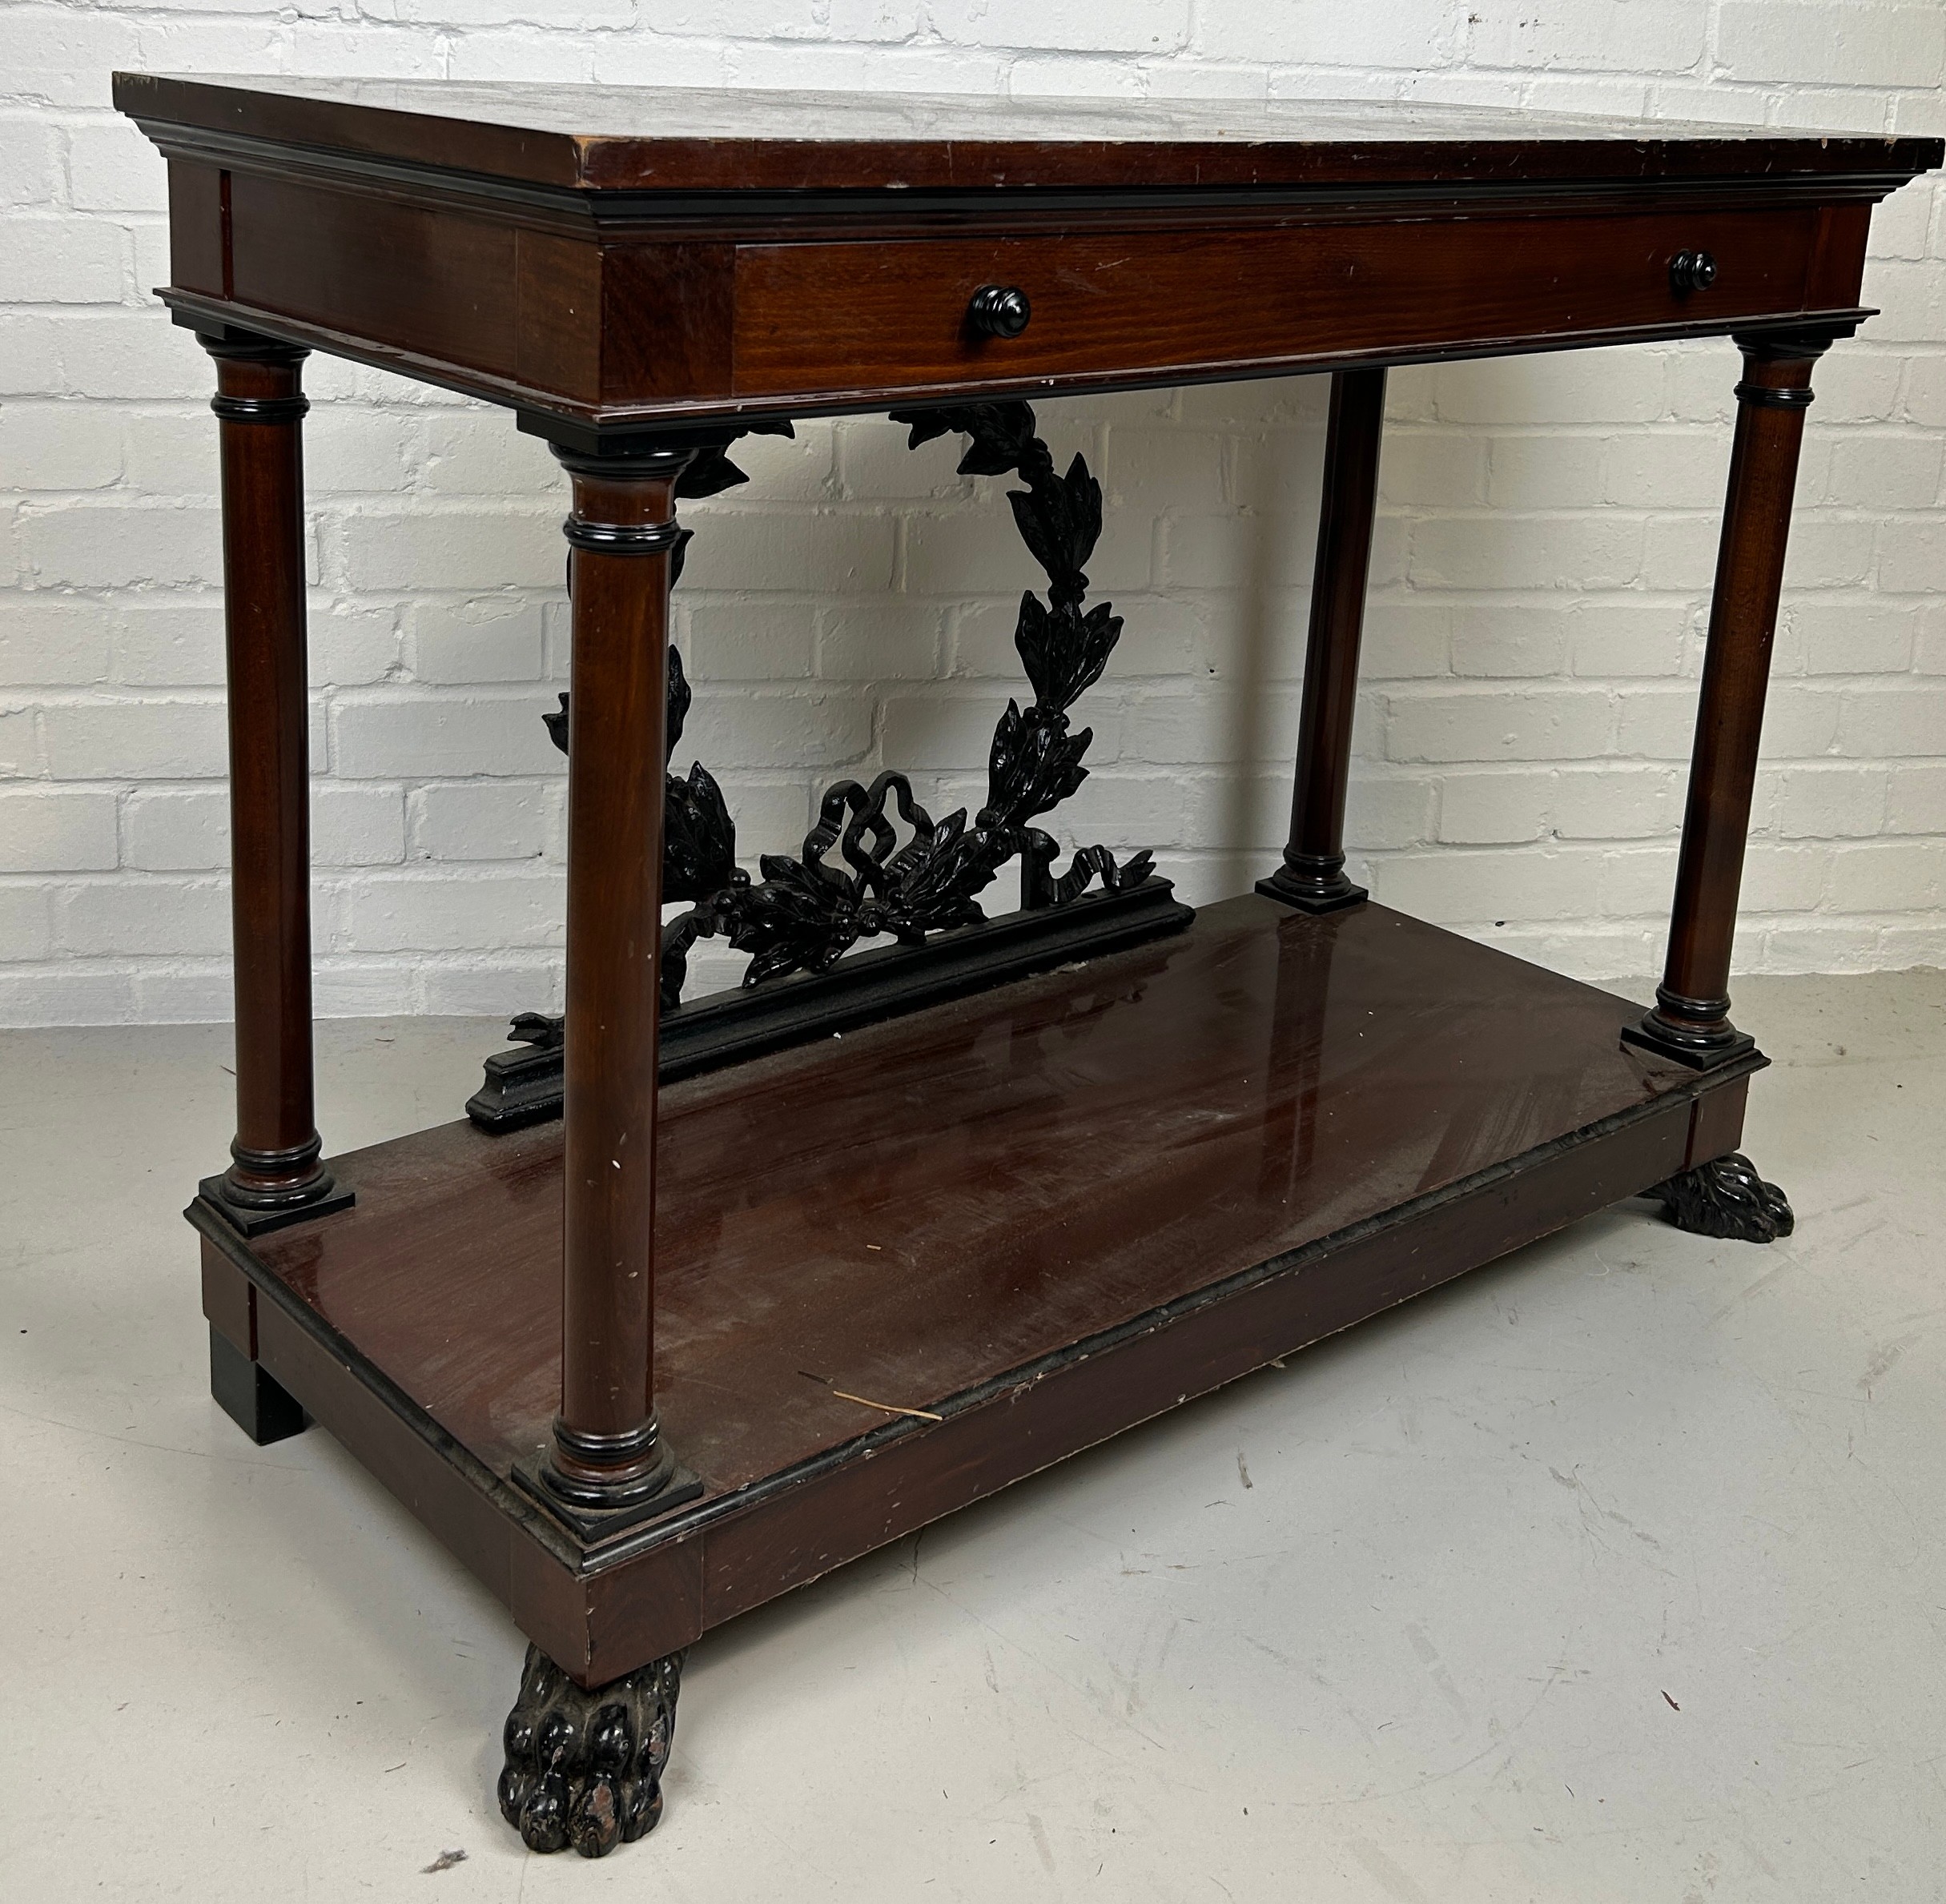 A REGENCY STYLE REPRODUCTION MAHOGANY CONSOLE TABLE WITH METAL WREATH, 108cm x 80cm x 46cm - Image 4 of 5